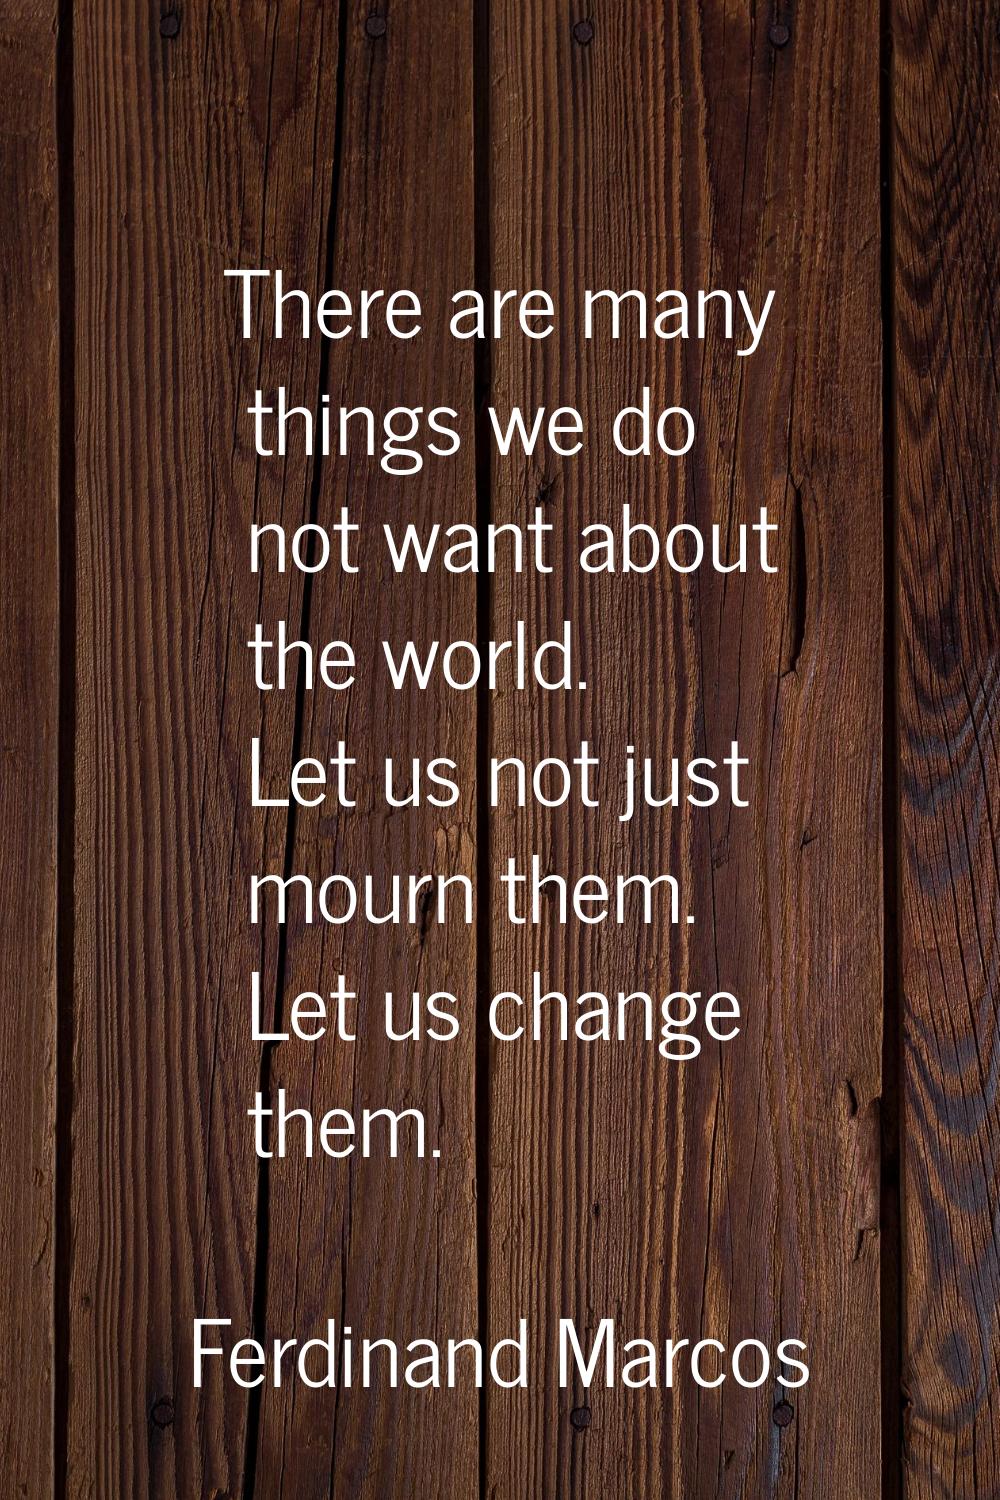 There are many things we do not want about the world. Let us not just mourn them. Let us change the